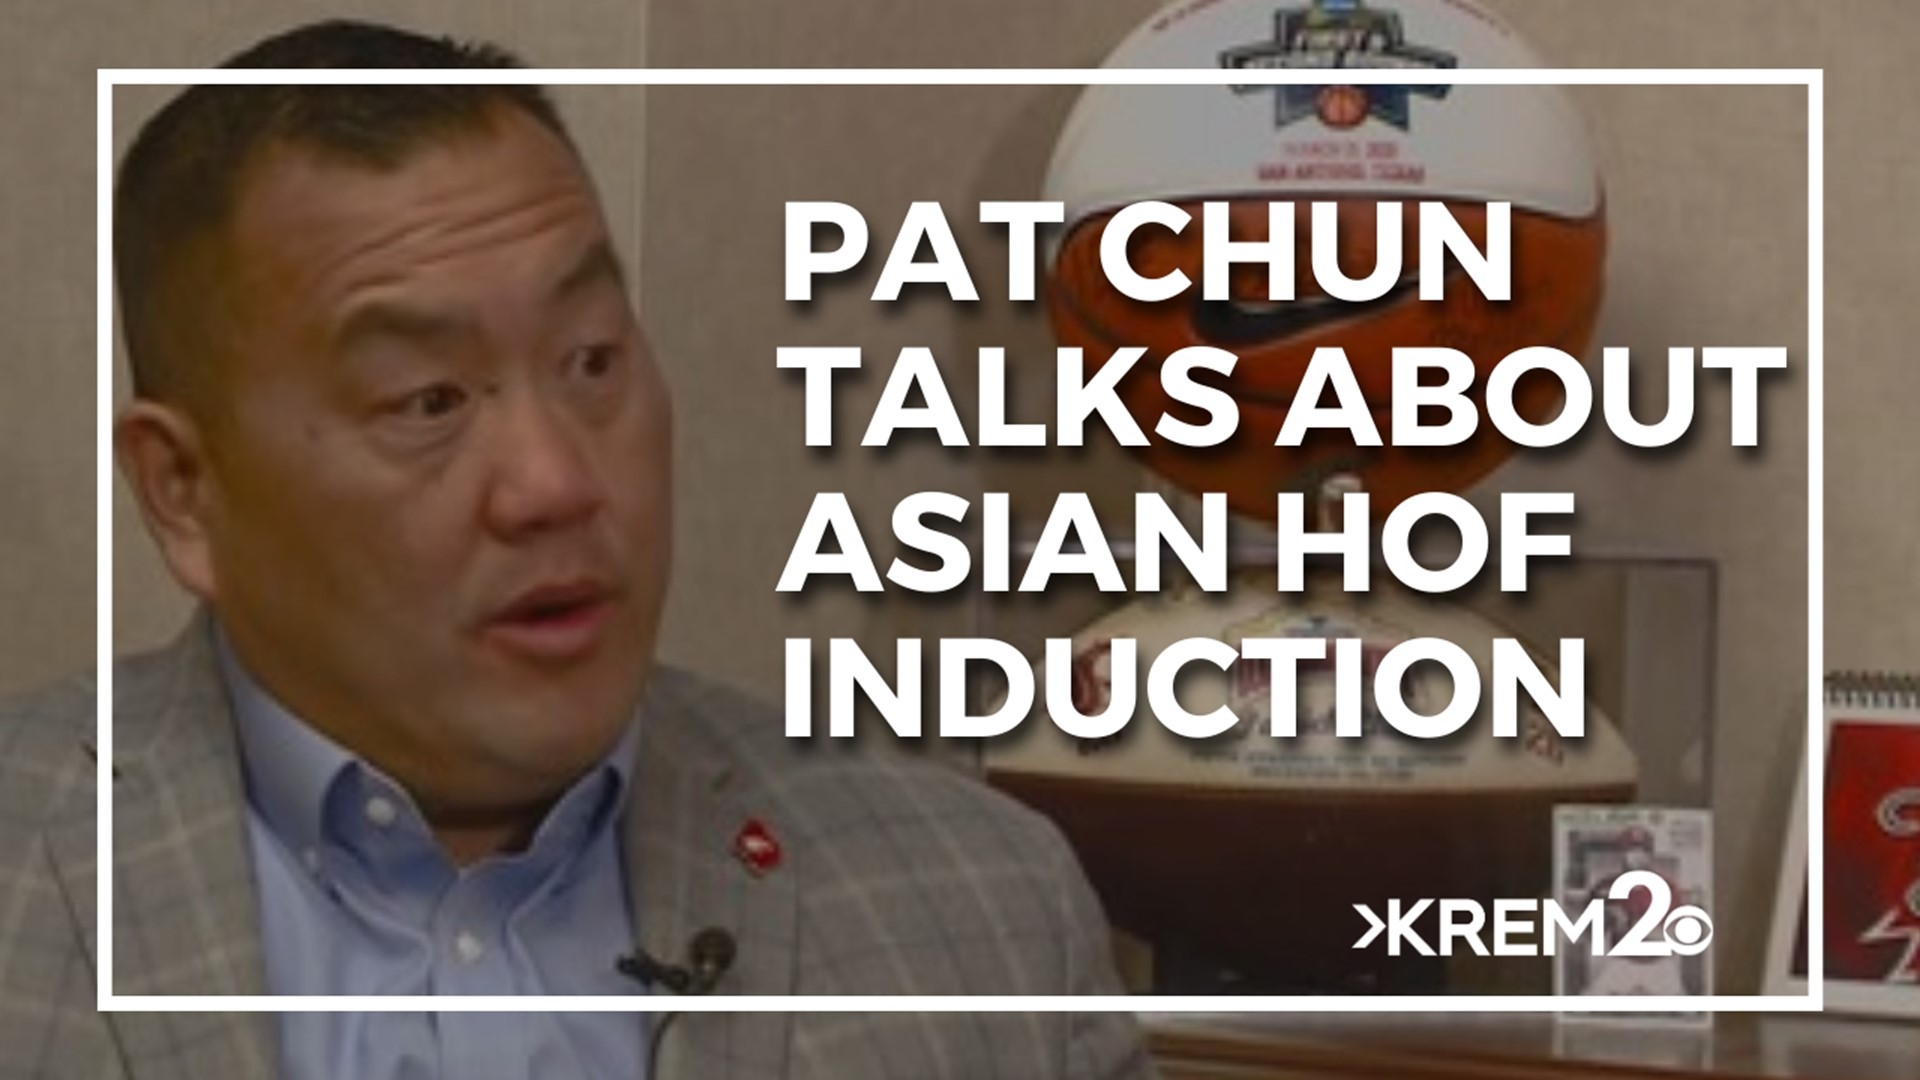 Chun's hiring as athletic director at WSU in 2018 made him the first Asian American AD at a Power 5 school.